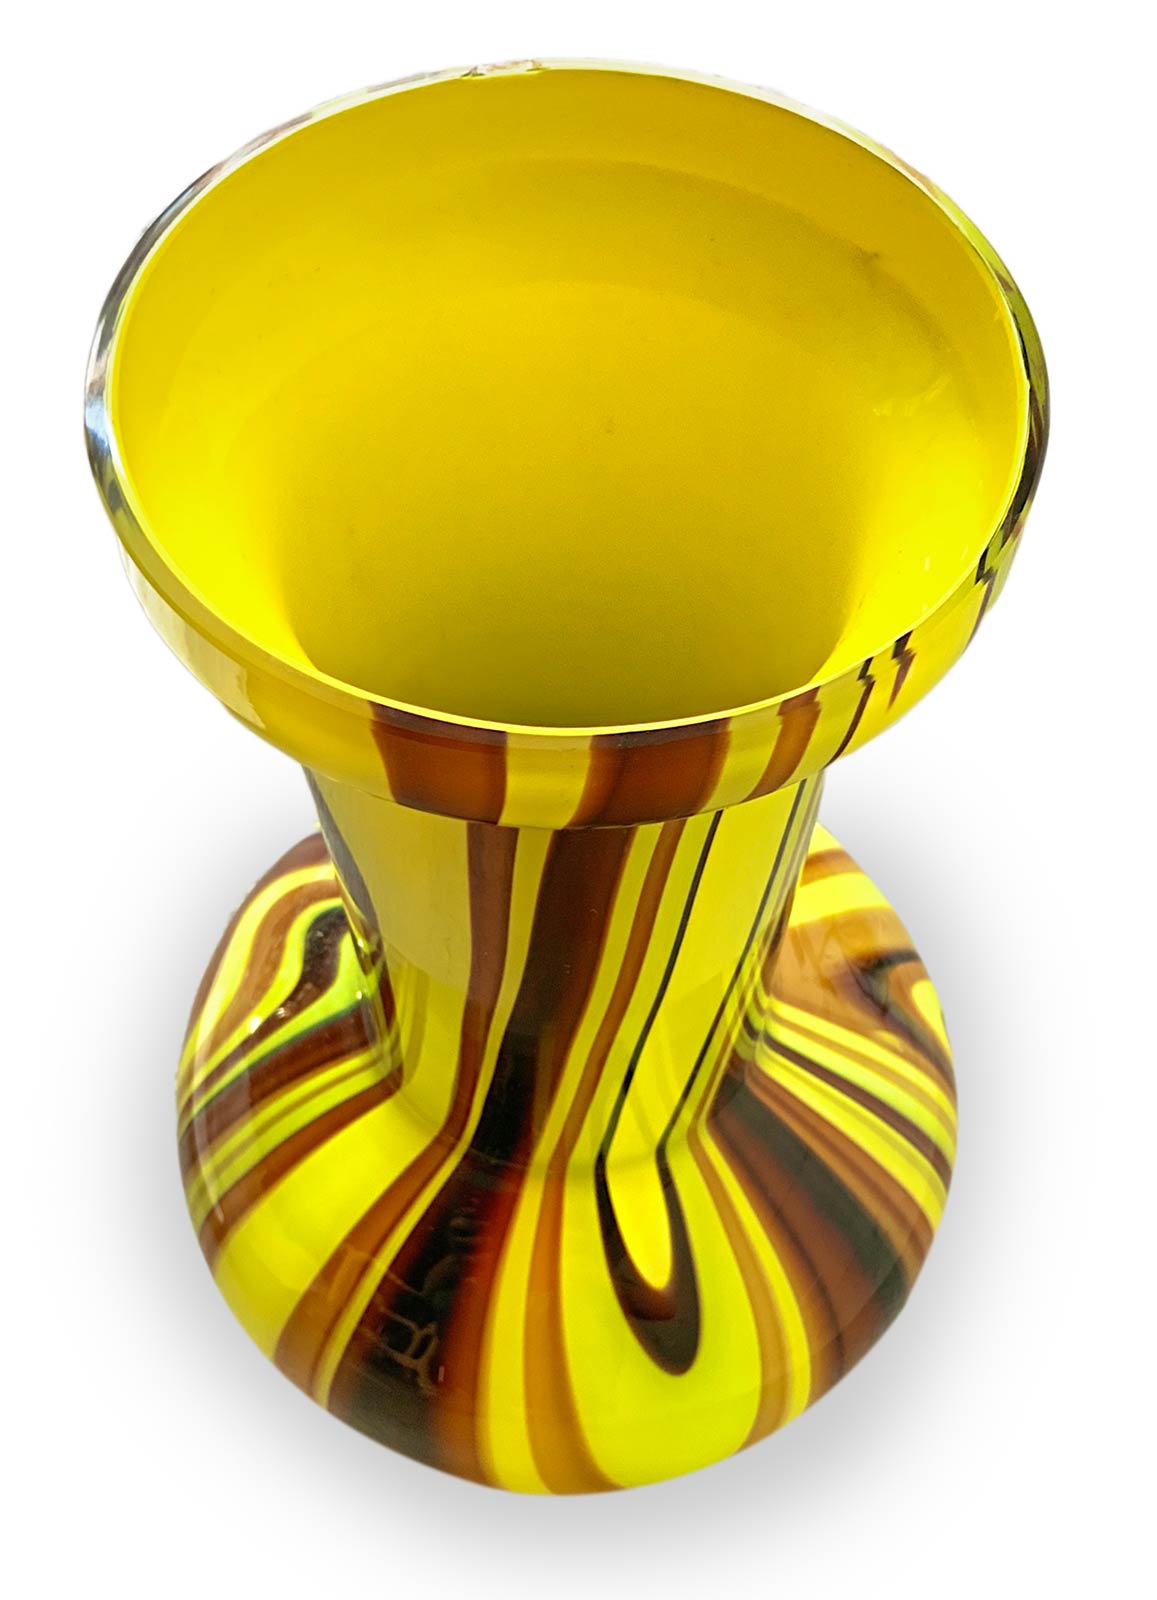 Carlo Moretti, Murano. Variegated glass vase with yellow and shades of brown, spherical body, tall - Image 2 of 4